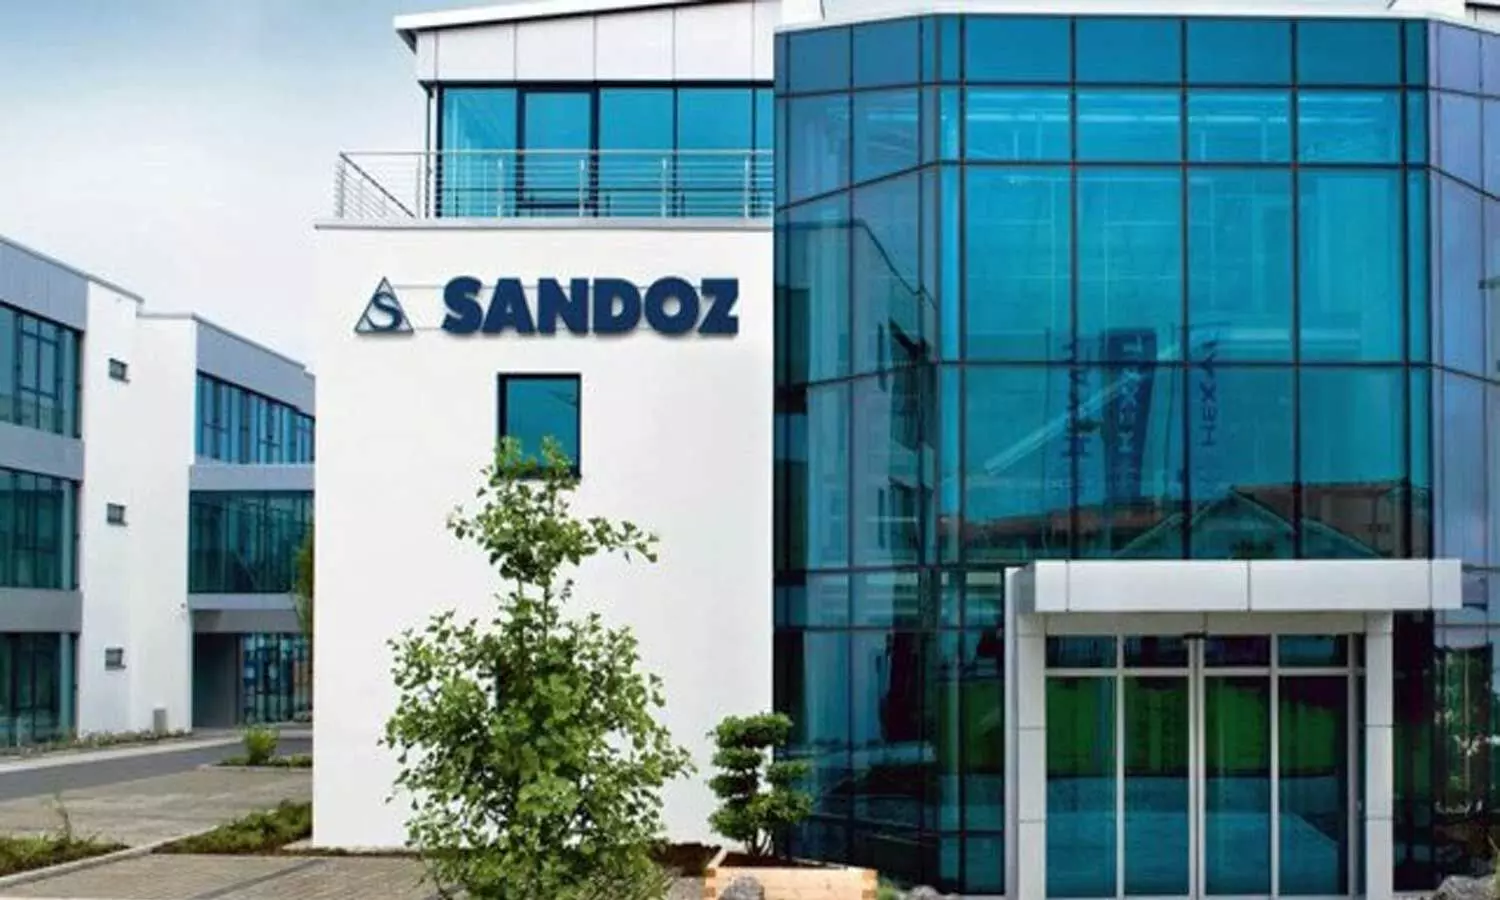 Novartis division Sandoz to exclusively commercialize six products in US across key therapeutic areas